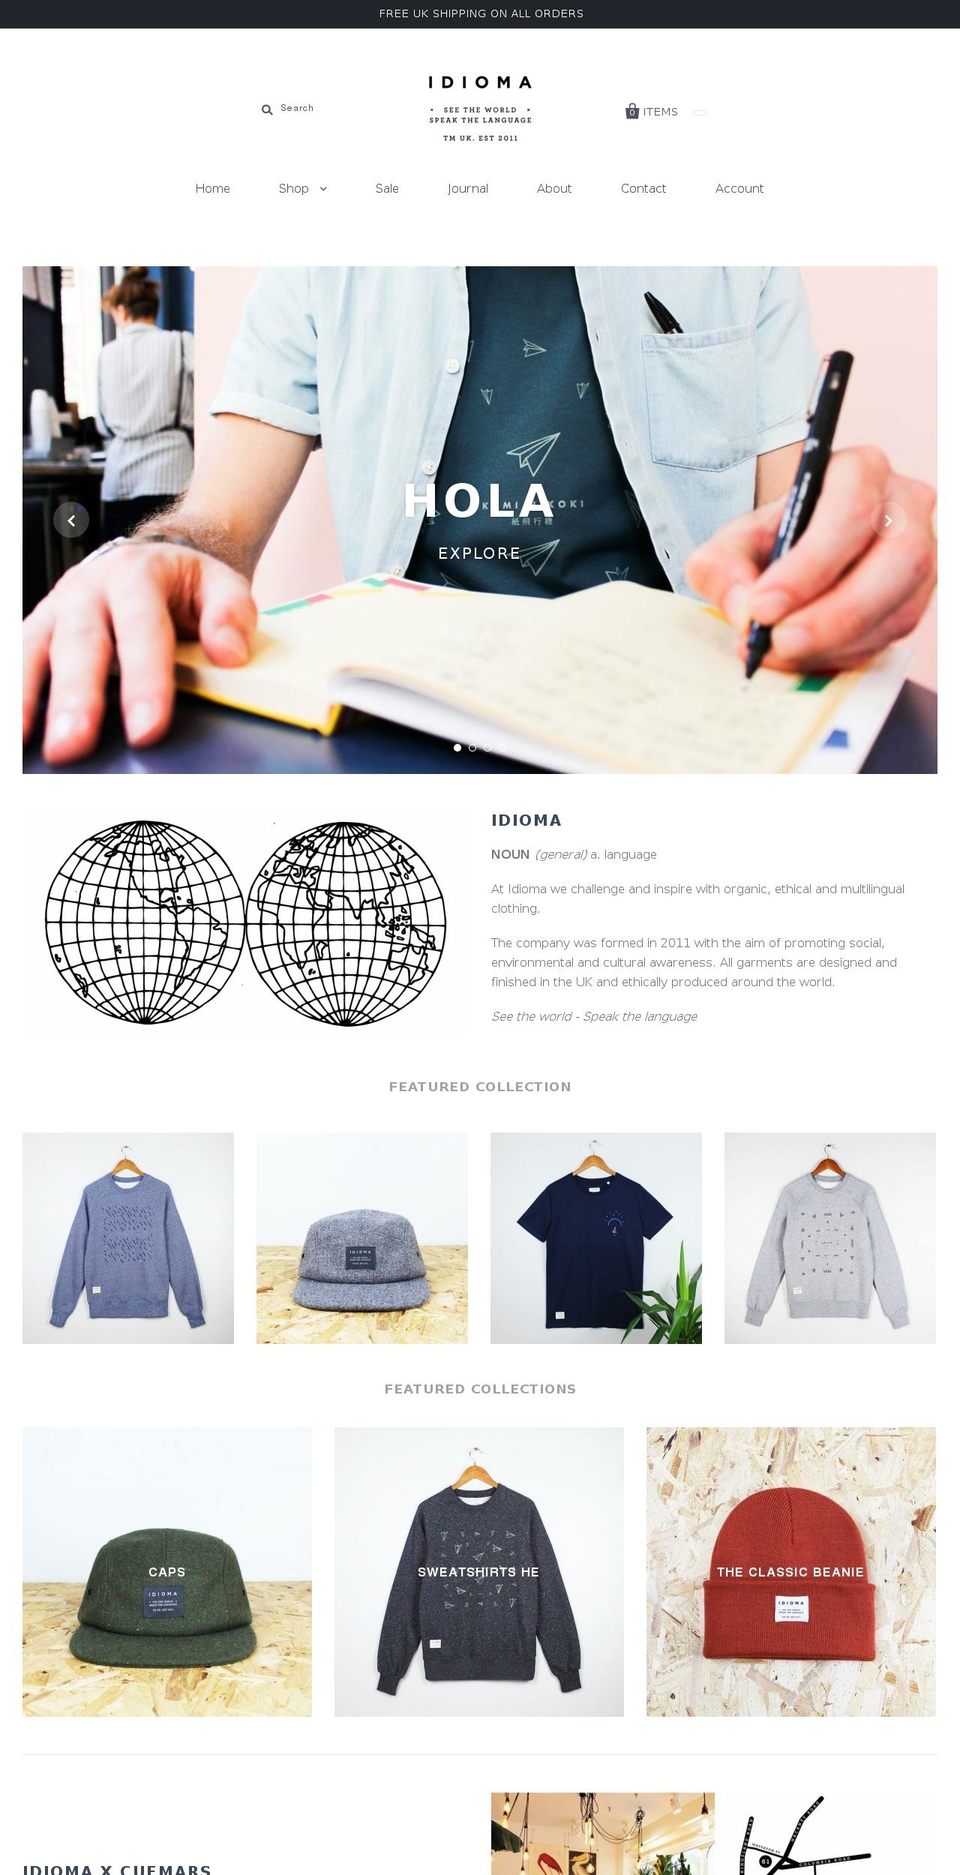 Pacific Shopify theme site example idioma-uk.com